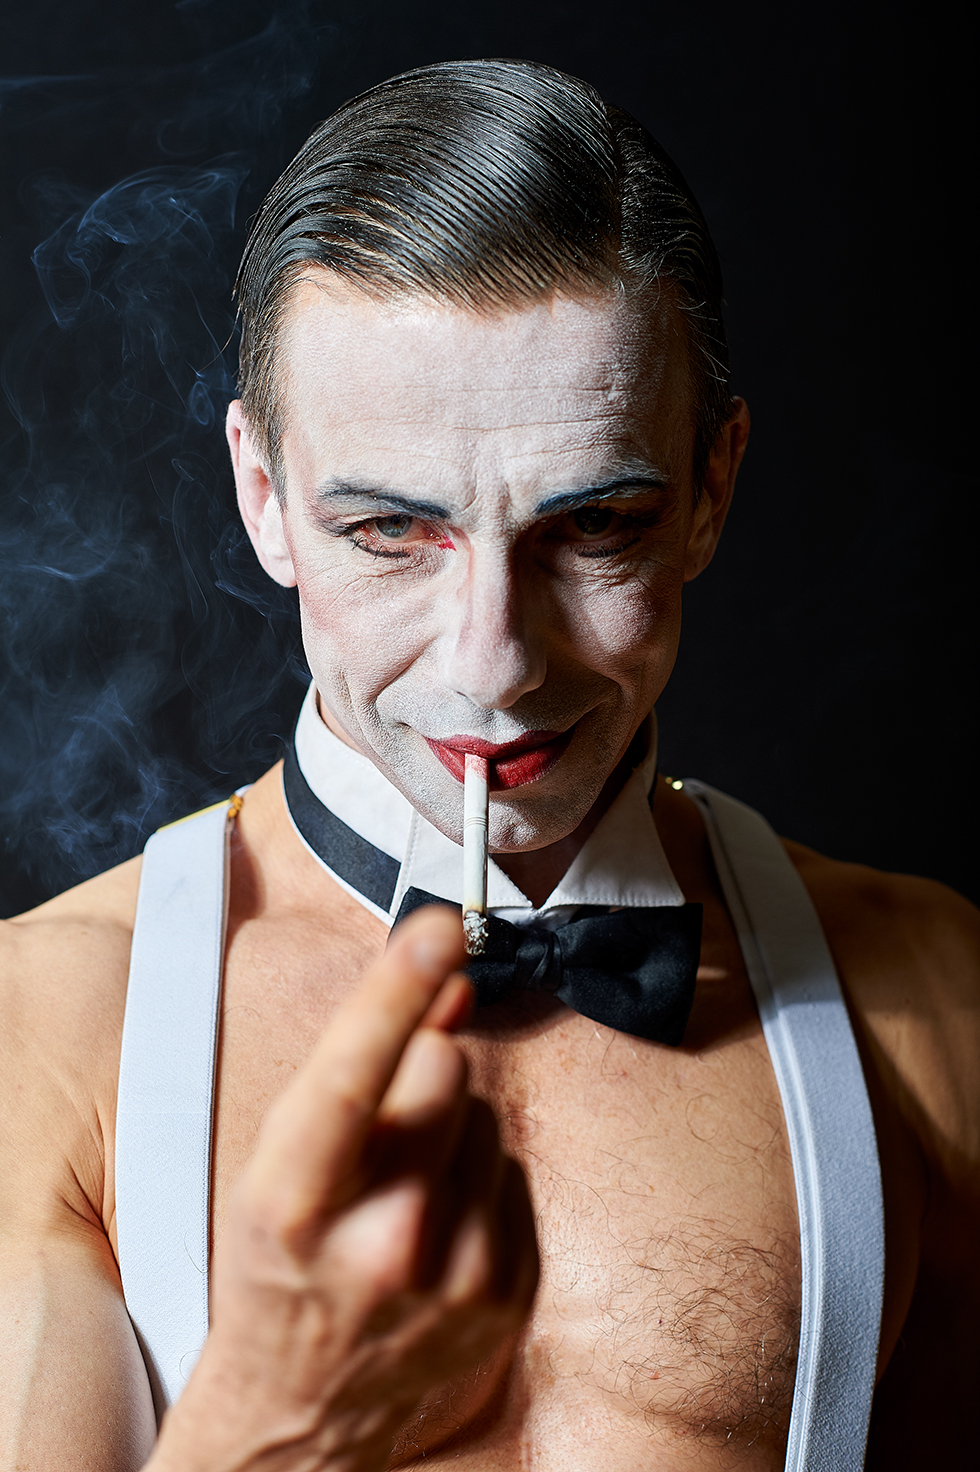 Actor Jon Peterson in Cabaret photography by Mike Lyons